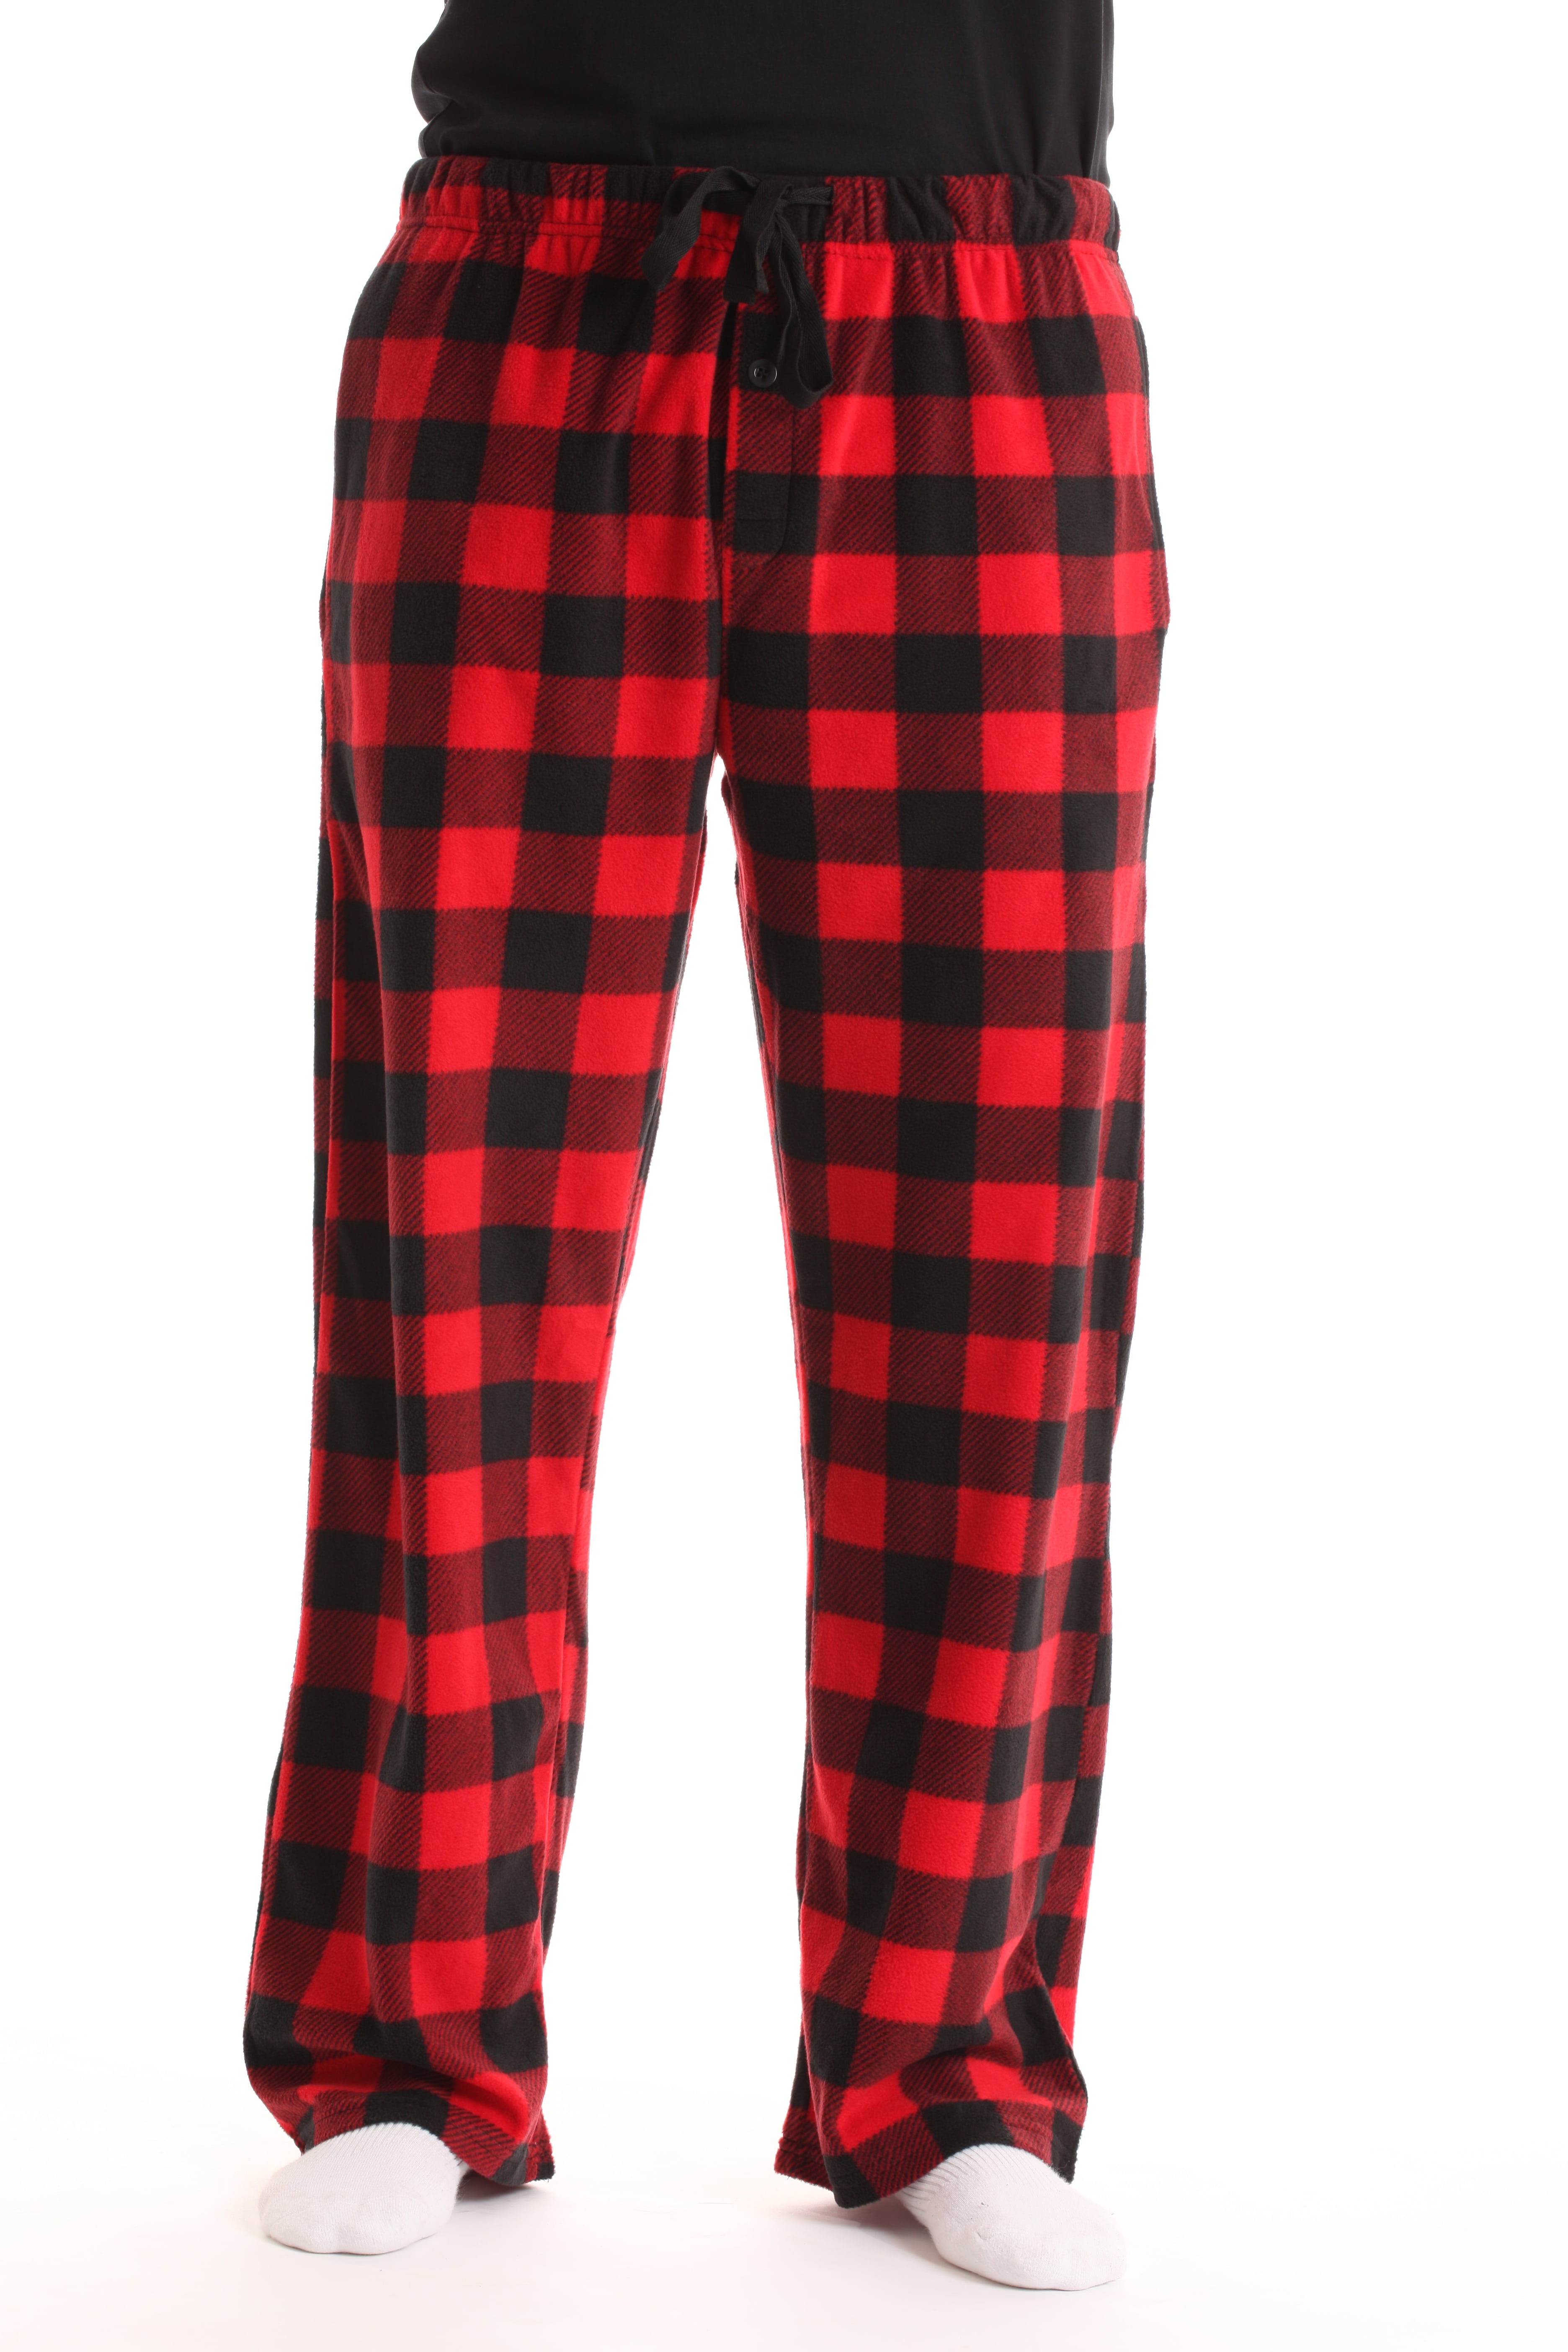 mens red checkered pants